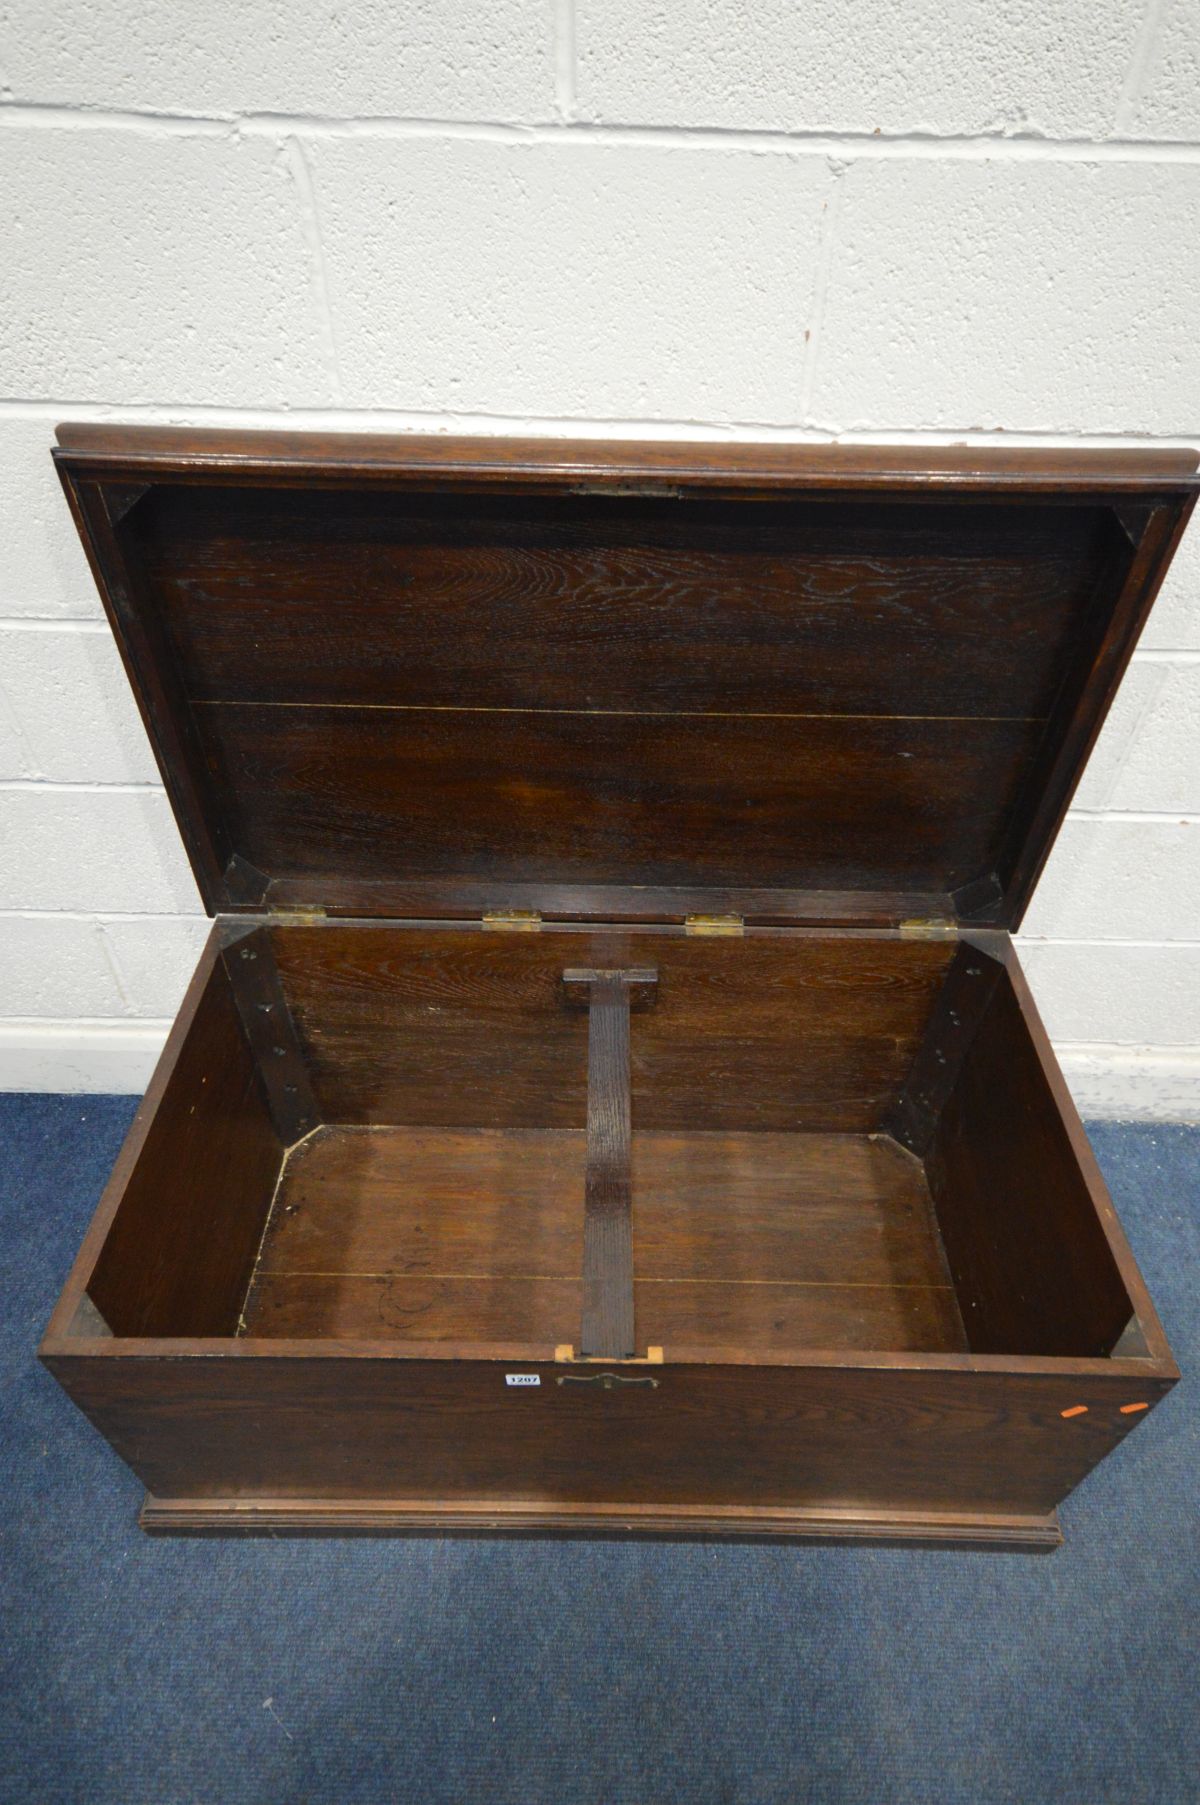 AN EARLY 20TH CENTURY OAK BLANKET CHEST, initialled 'AHH, 1904' to the lid, with twin brass handles, - Image 6 of 6